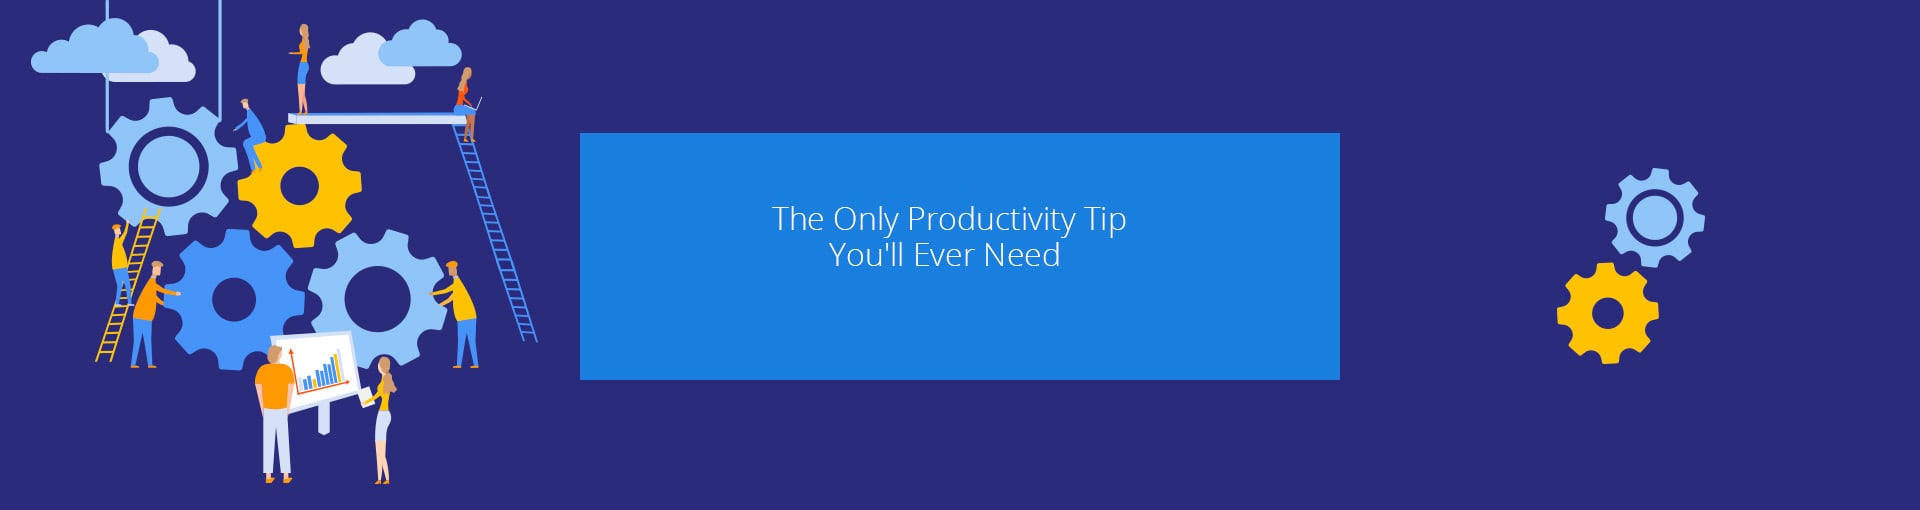 The Only Productivity Tip You'll Ever Need Featured Image